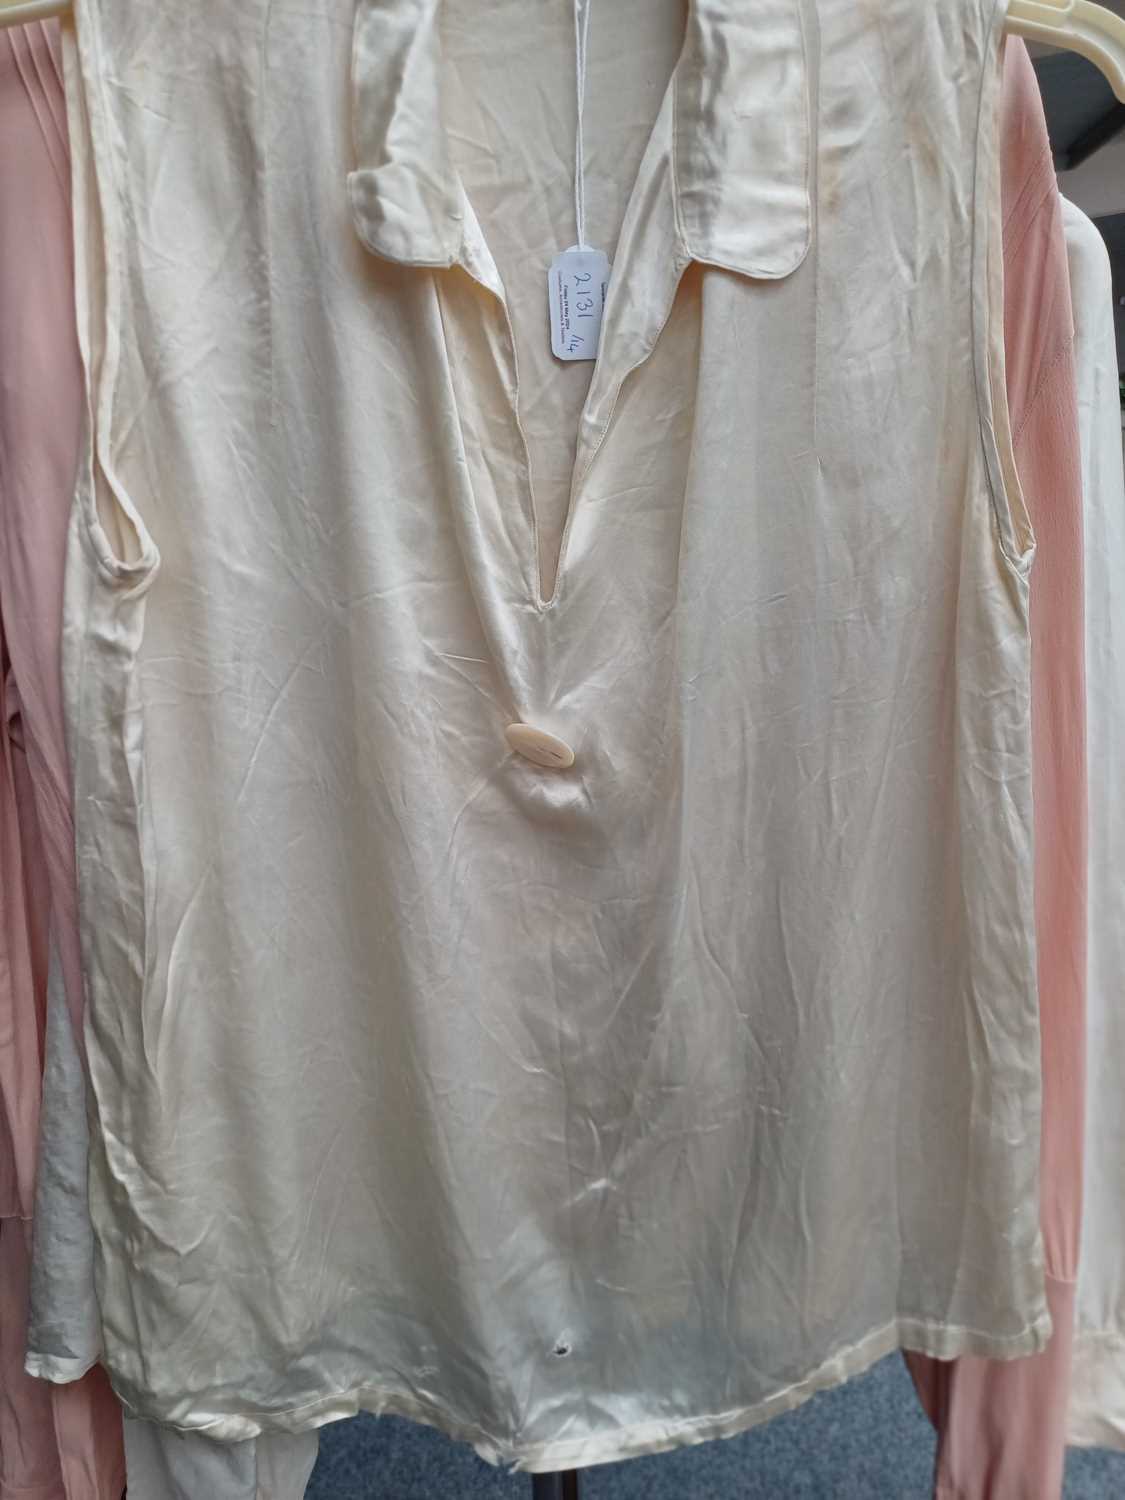 Fourteen Circa 1920-40s Ladies Tops and Shirts in white, cream, pale pink and peach in silk, satin - Image 24 of 29